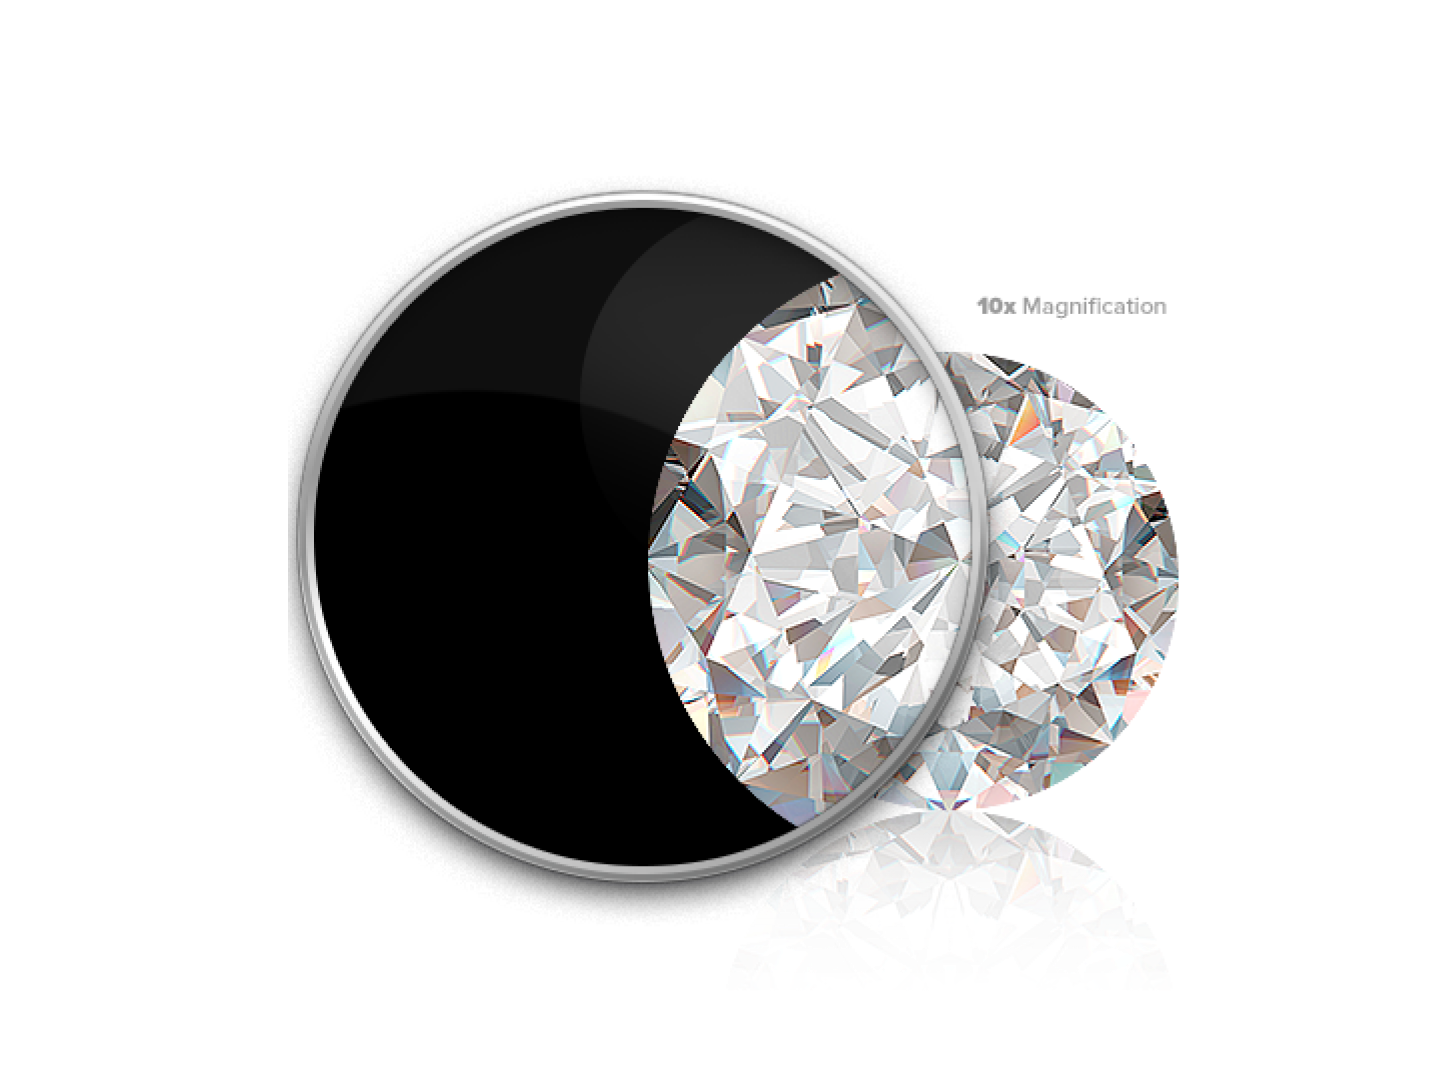 A diamond viewed to the naked eye compared to 10x magnification.